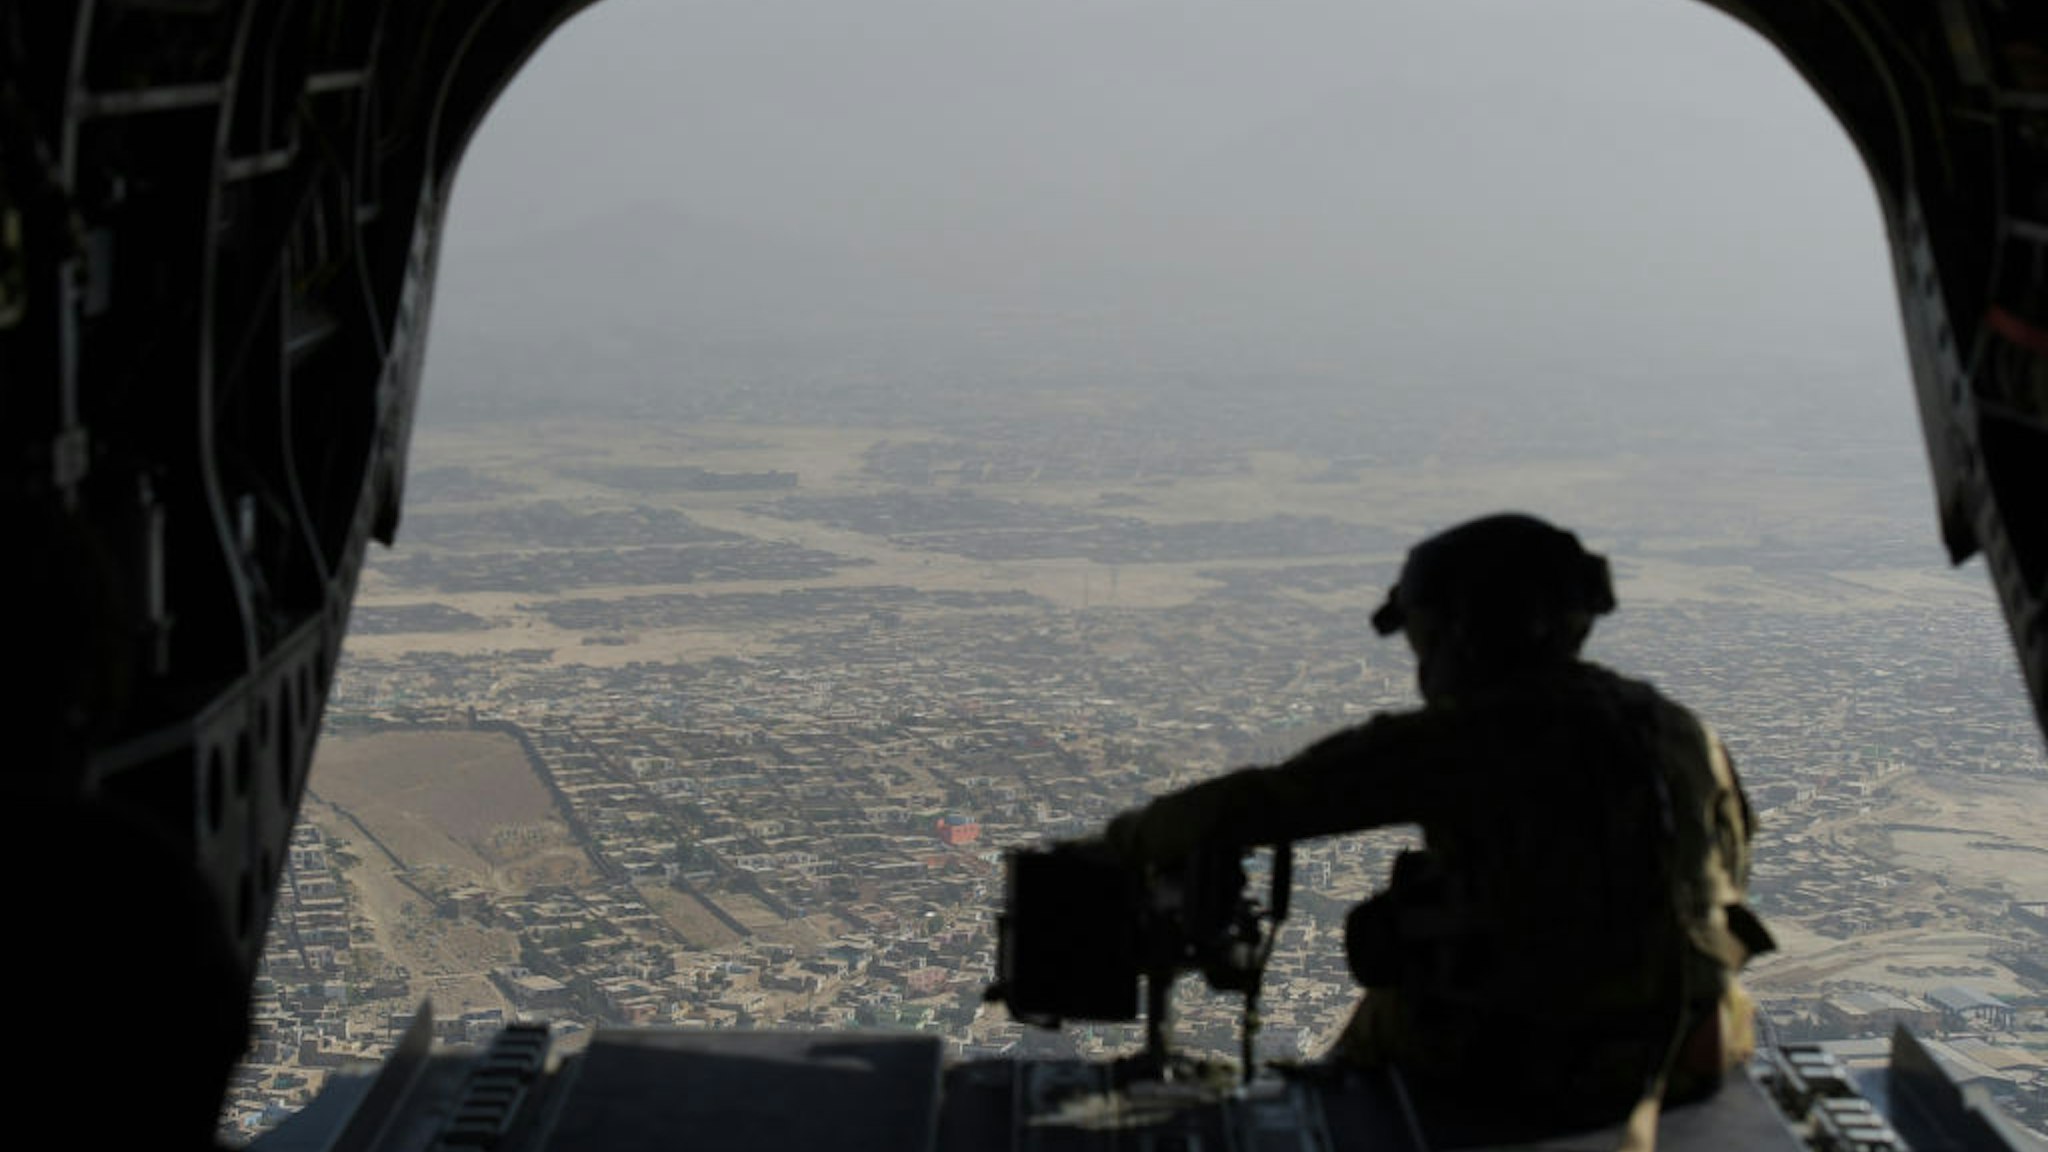 In this photograph taken on August 10, 2017, a US soldier sits in the rear of Chinook helicopter while flying over Kabul. Fresh recruits to Afghanistan's elite special operations forces will soon be on the frontline of the war against a resurgent Taliban -- a battle US President Donald Trump has vowed "to win" by putting more American boots on the ground indefinitely. Camp Morehead, a former Soviet base near Kabul, is one of two training bases where the commandos are drilled by Afghan instructors in a programme overseen by US-led international forces. / AFP PHOTO / SHAH MARAI / TO GO WITH: Afghanistan-army-conflict, FOCUS by Anne CHAON (Photo credit should read SHAH MARAI/AFP via Getty Images)